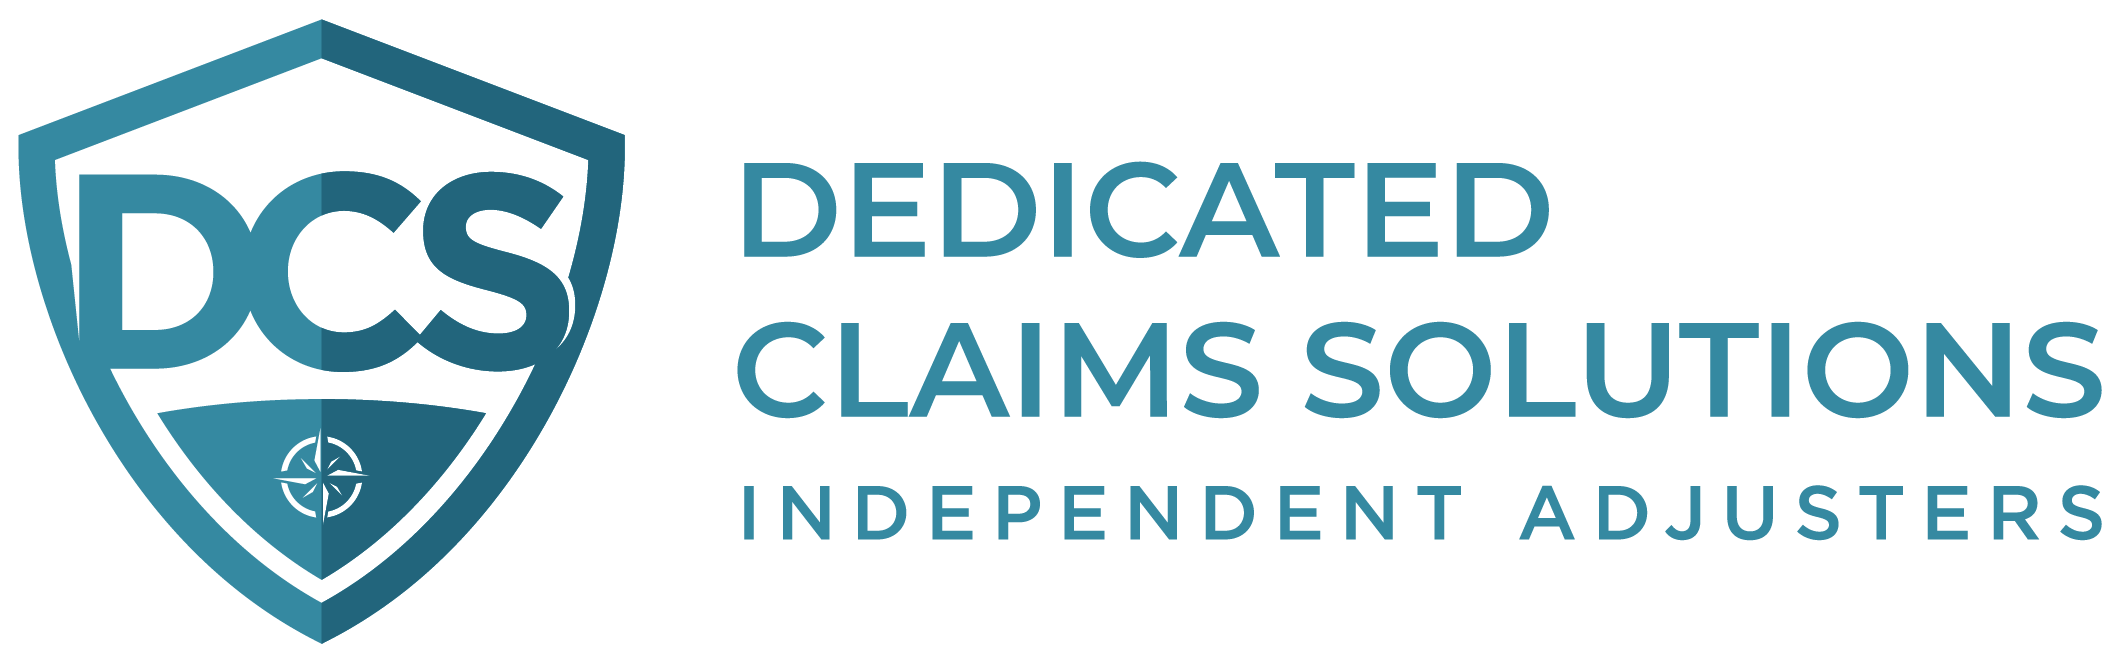 Dedicated Claims